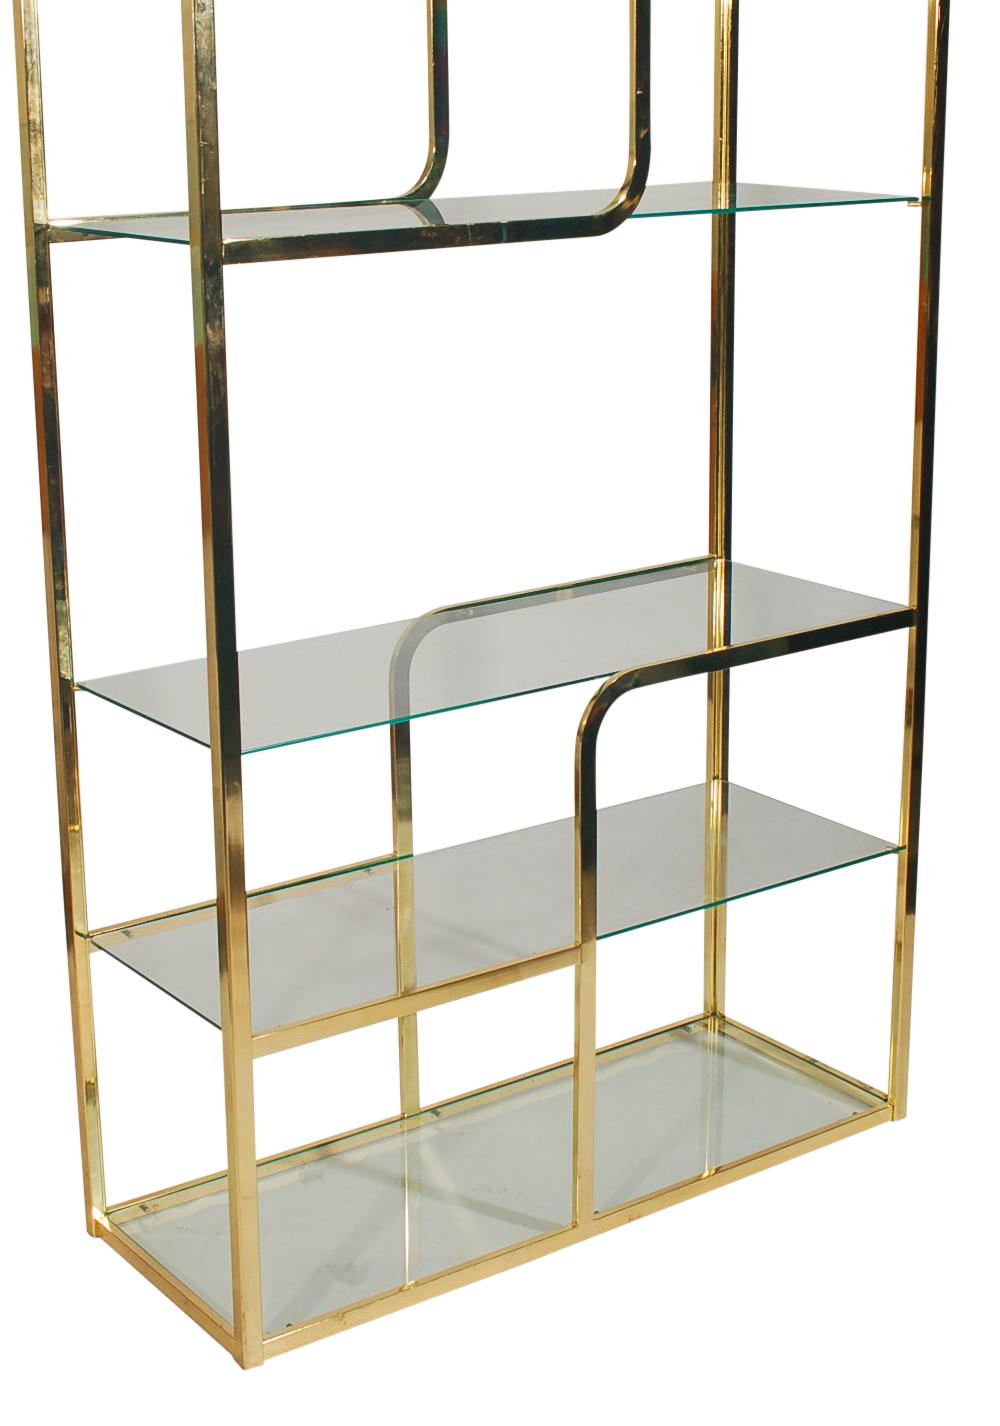 A contemporary brass étagère from the 1970s in the style of Milo Baughman. It features an asymmetrical brass frame design with clear glass shelving.